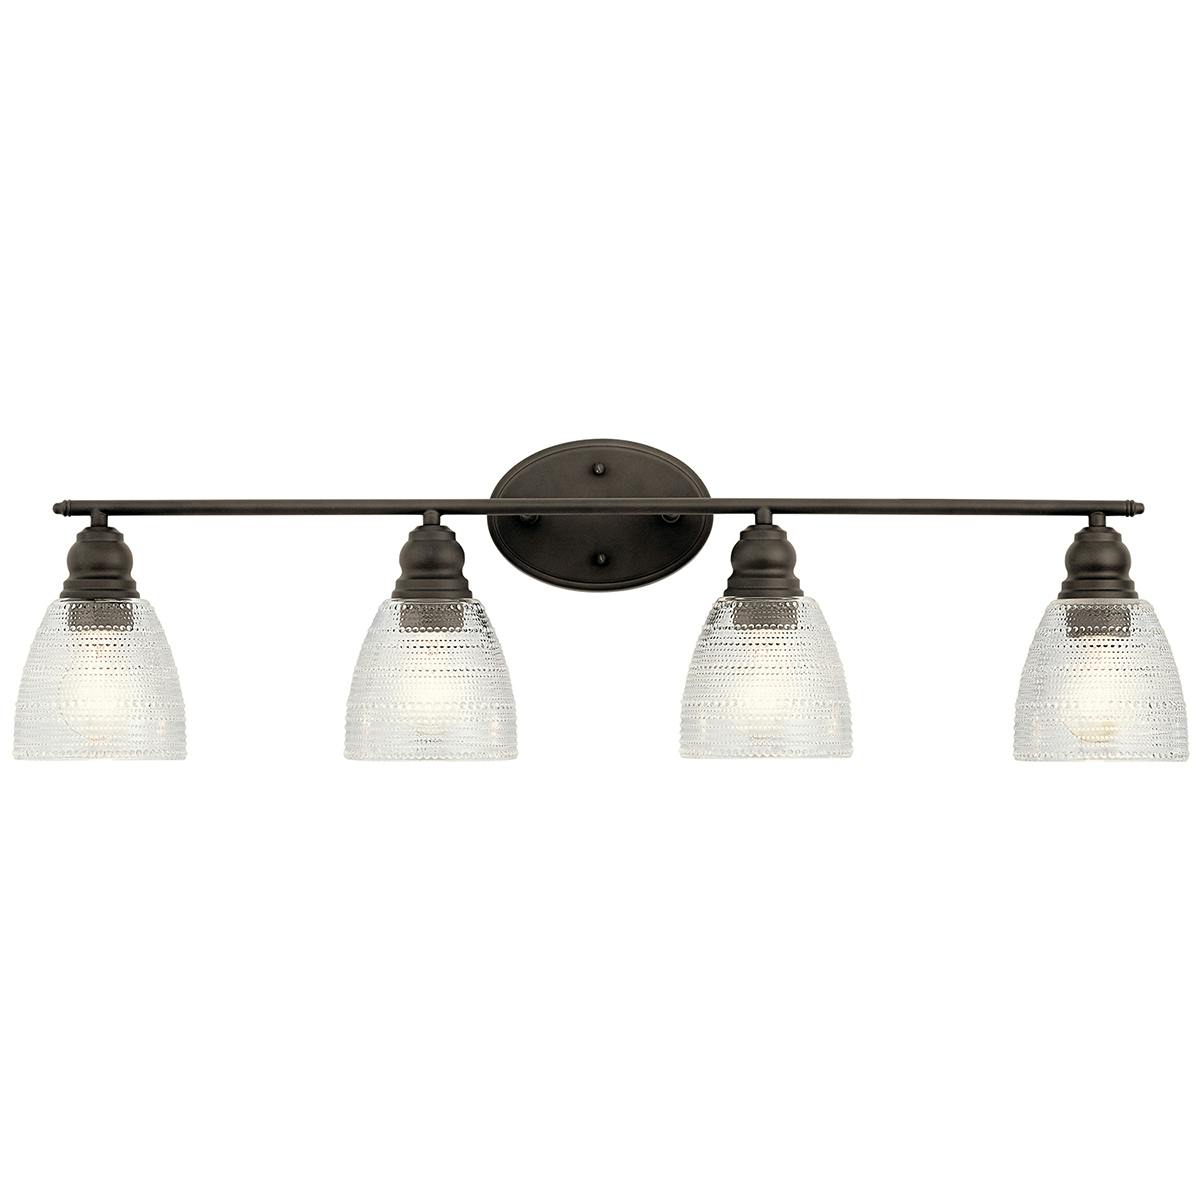 Front view of the Karmarie 4 Light Vanity Light Olde Bronze on a white background